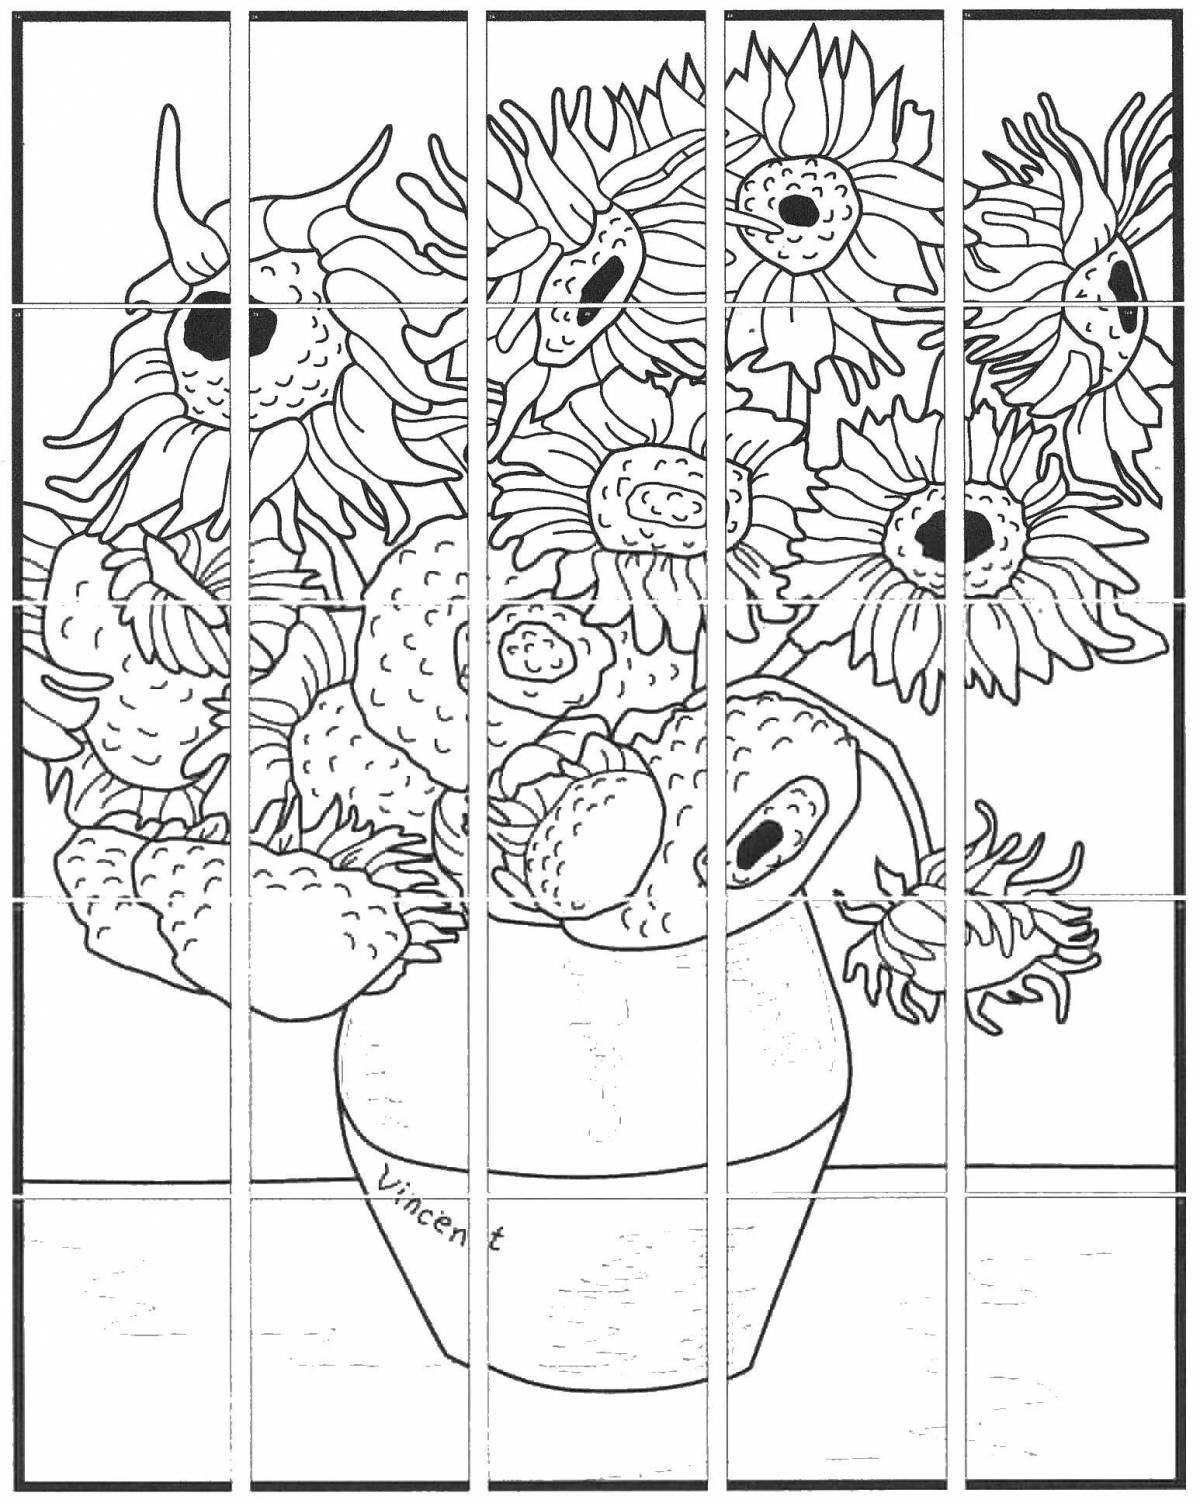 Fun coloring pages on canvas